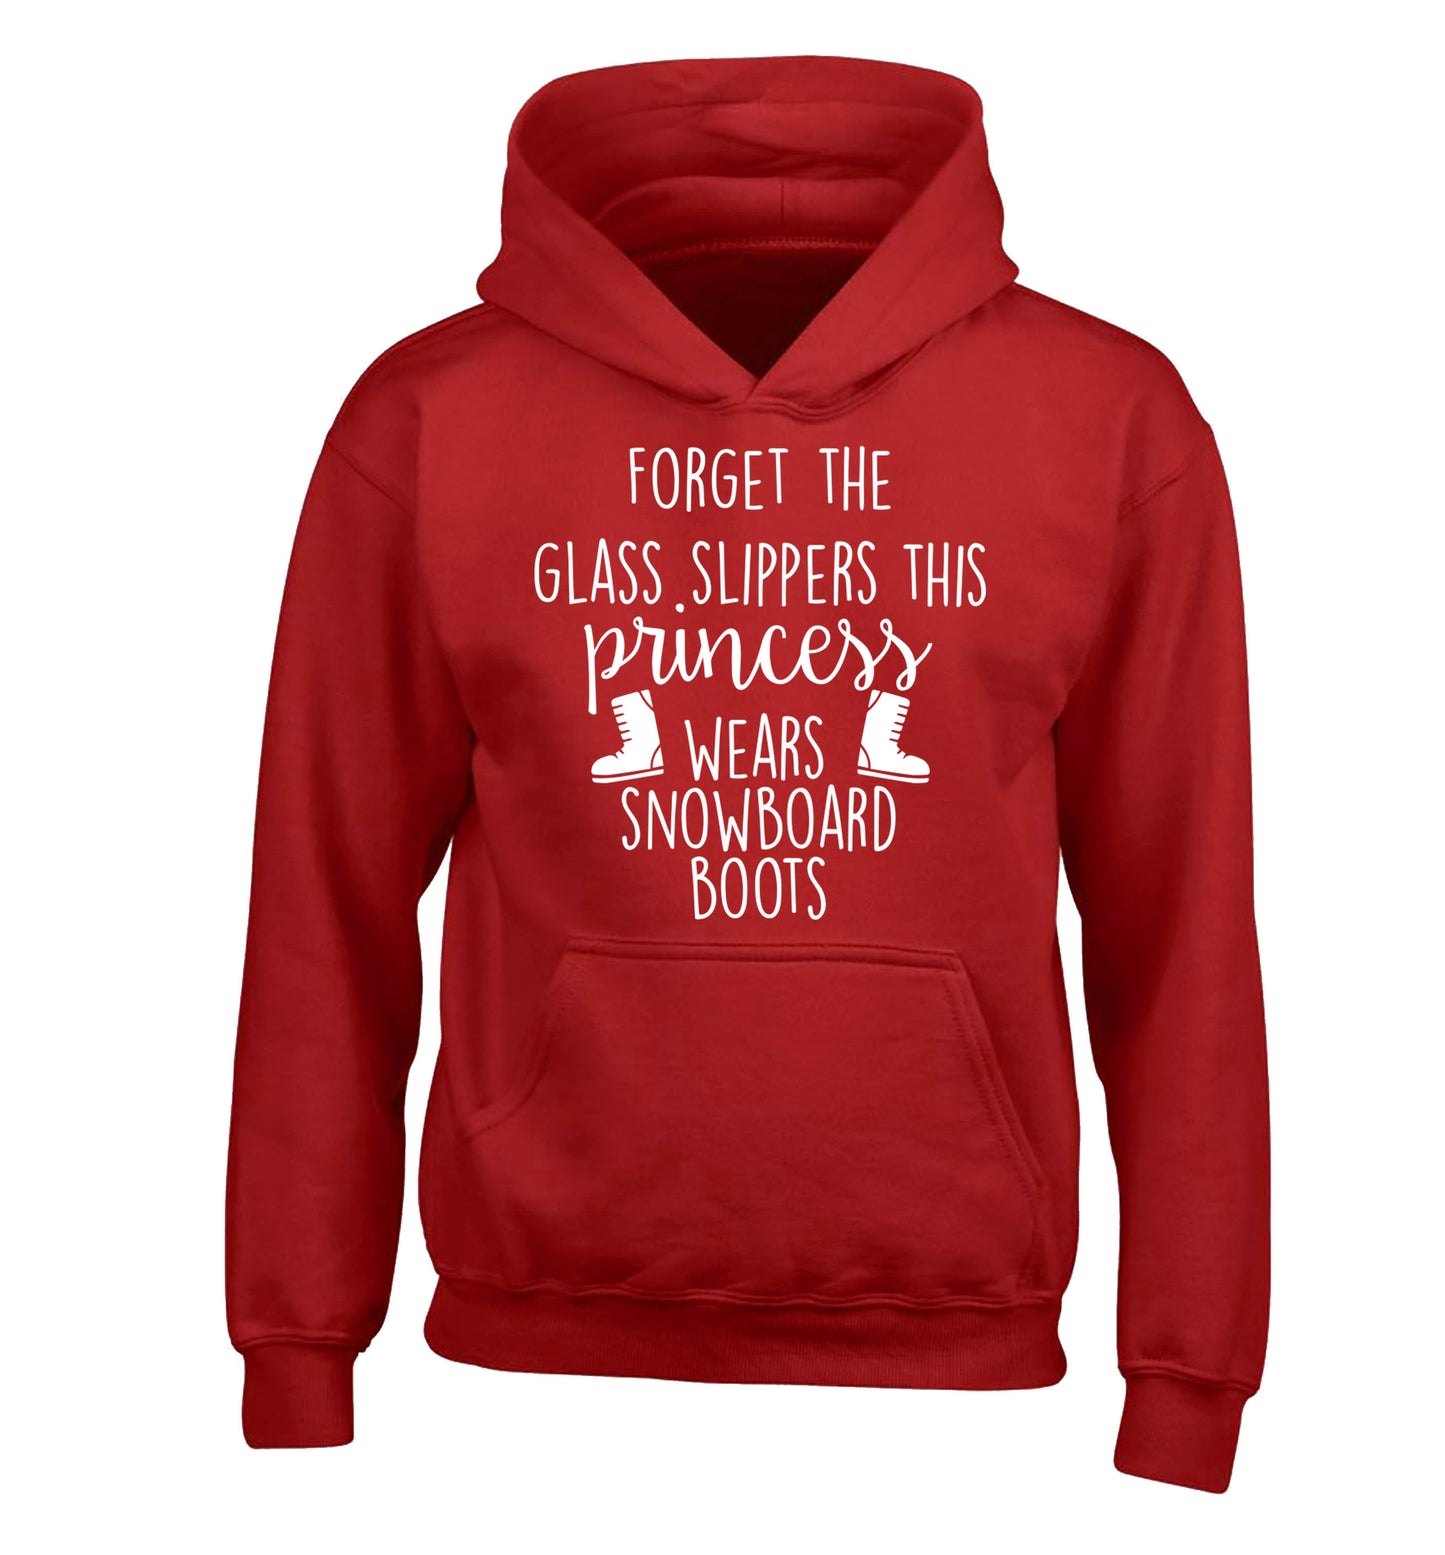 Forget the glass slippers this princess wears snowboard boots children's red hoodie 12-14 Years